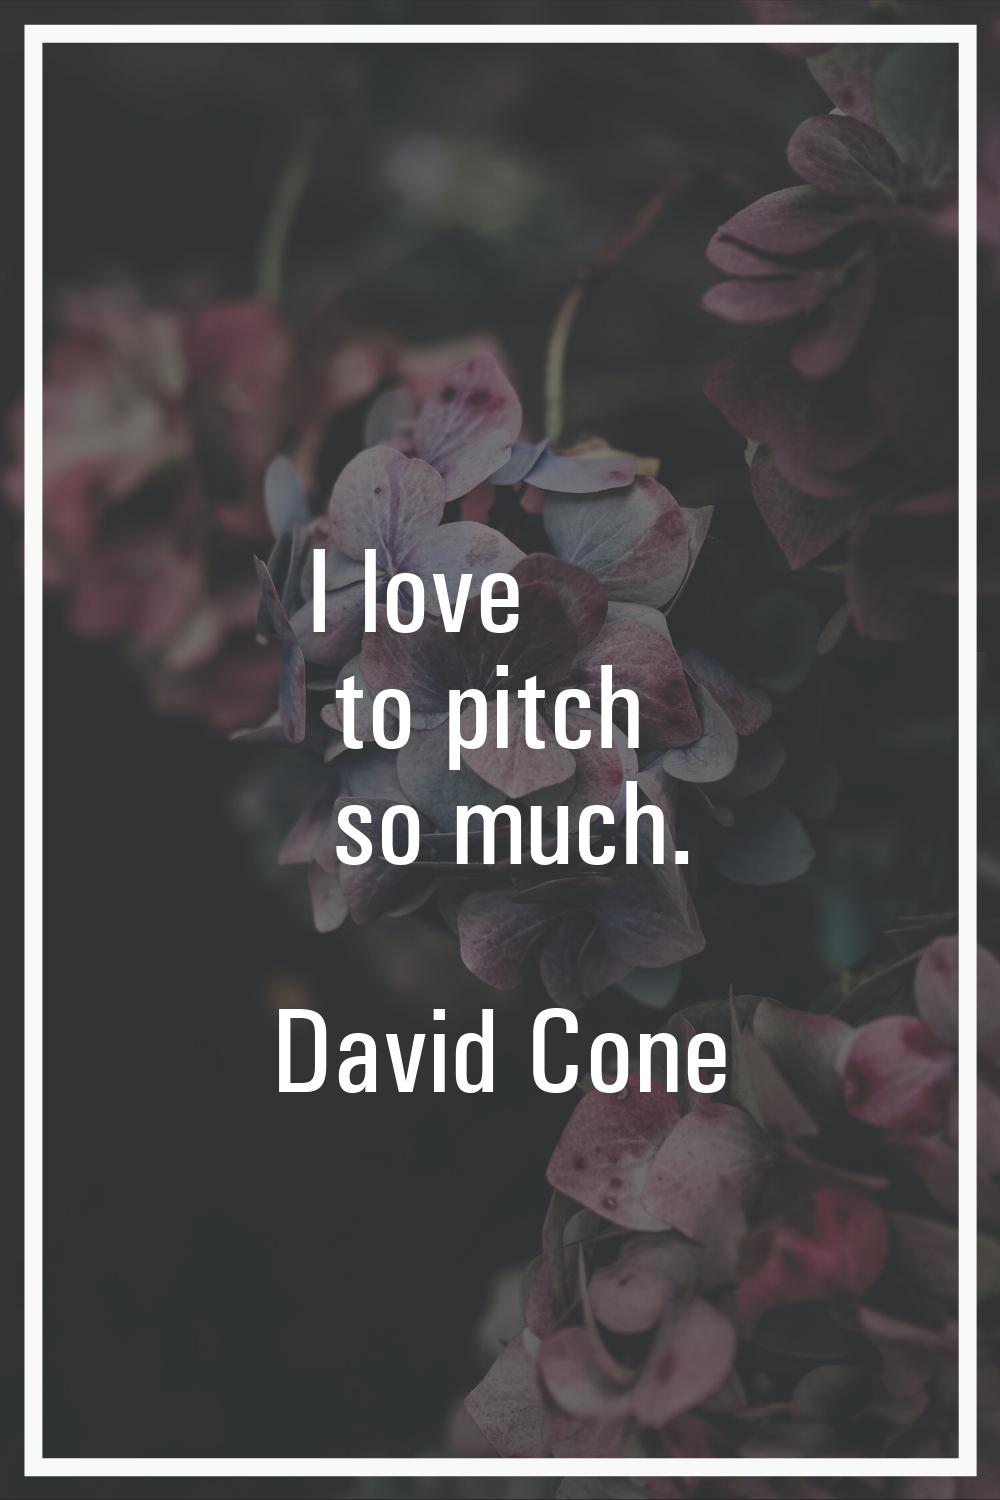 I love to pitch so much.